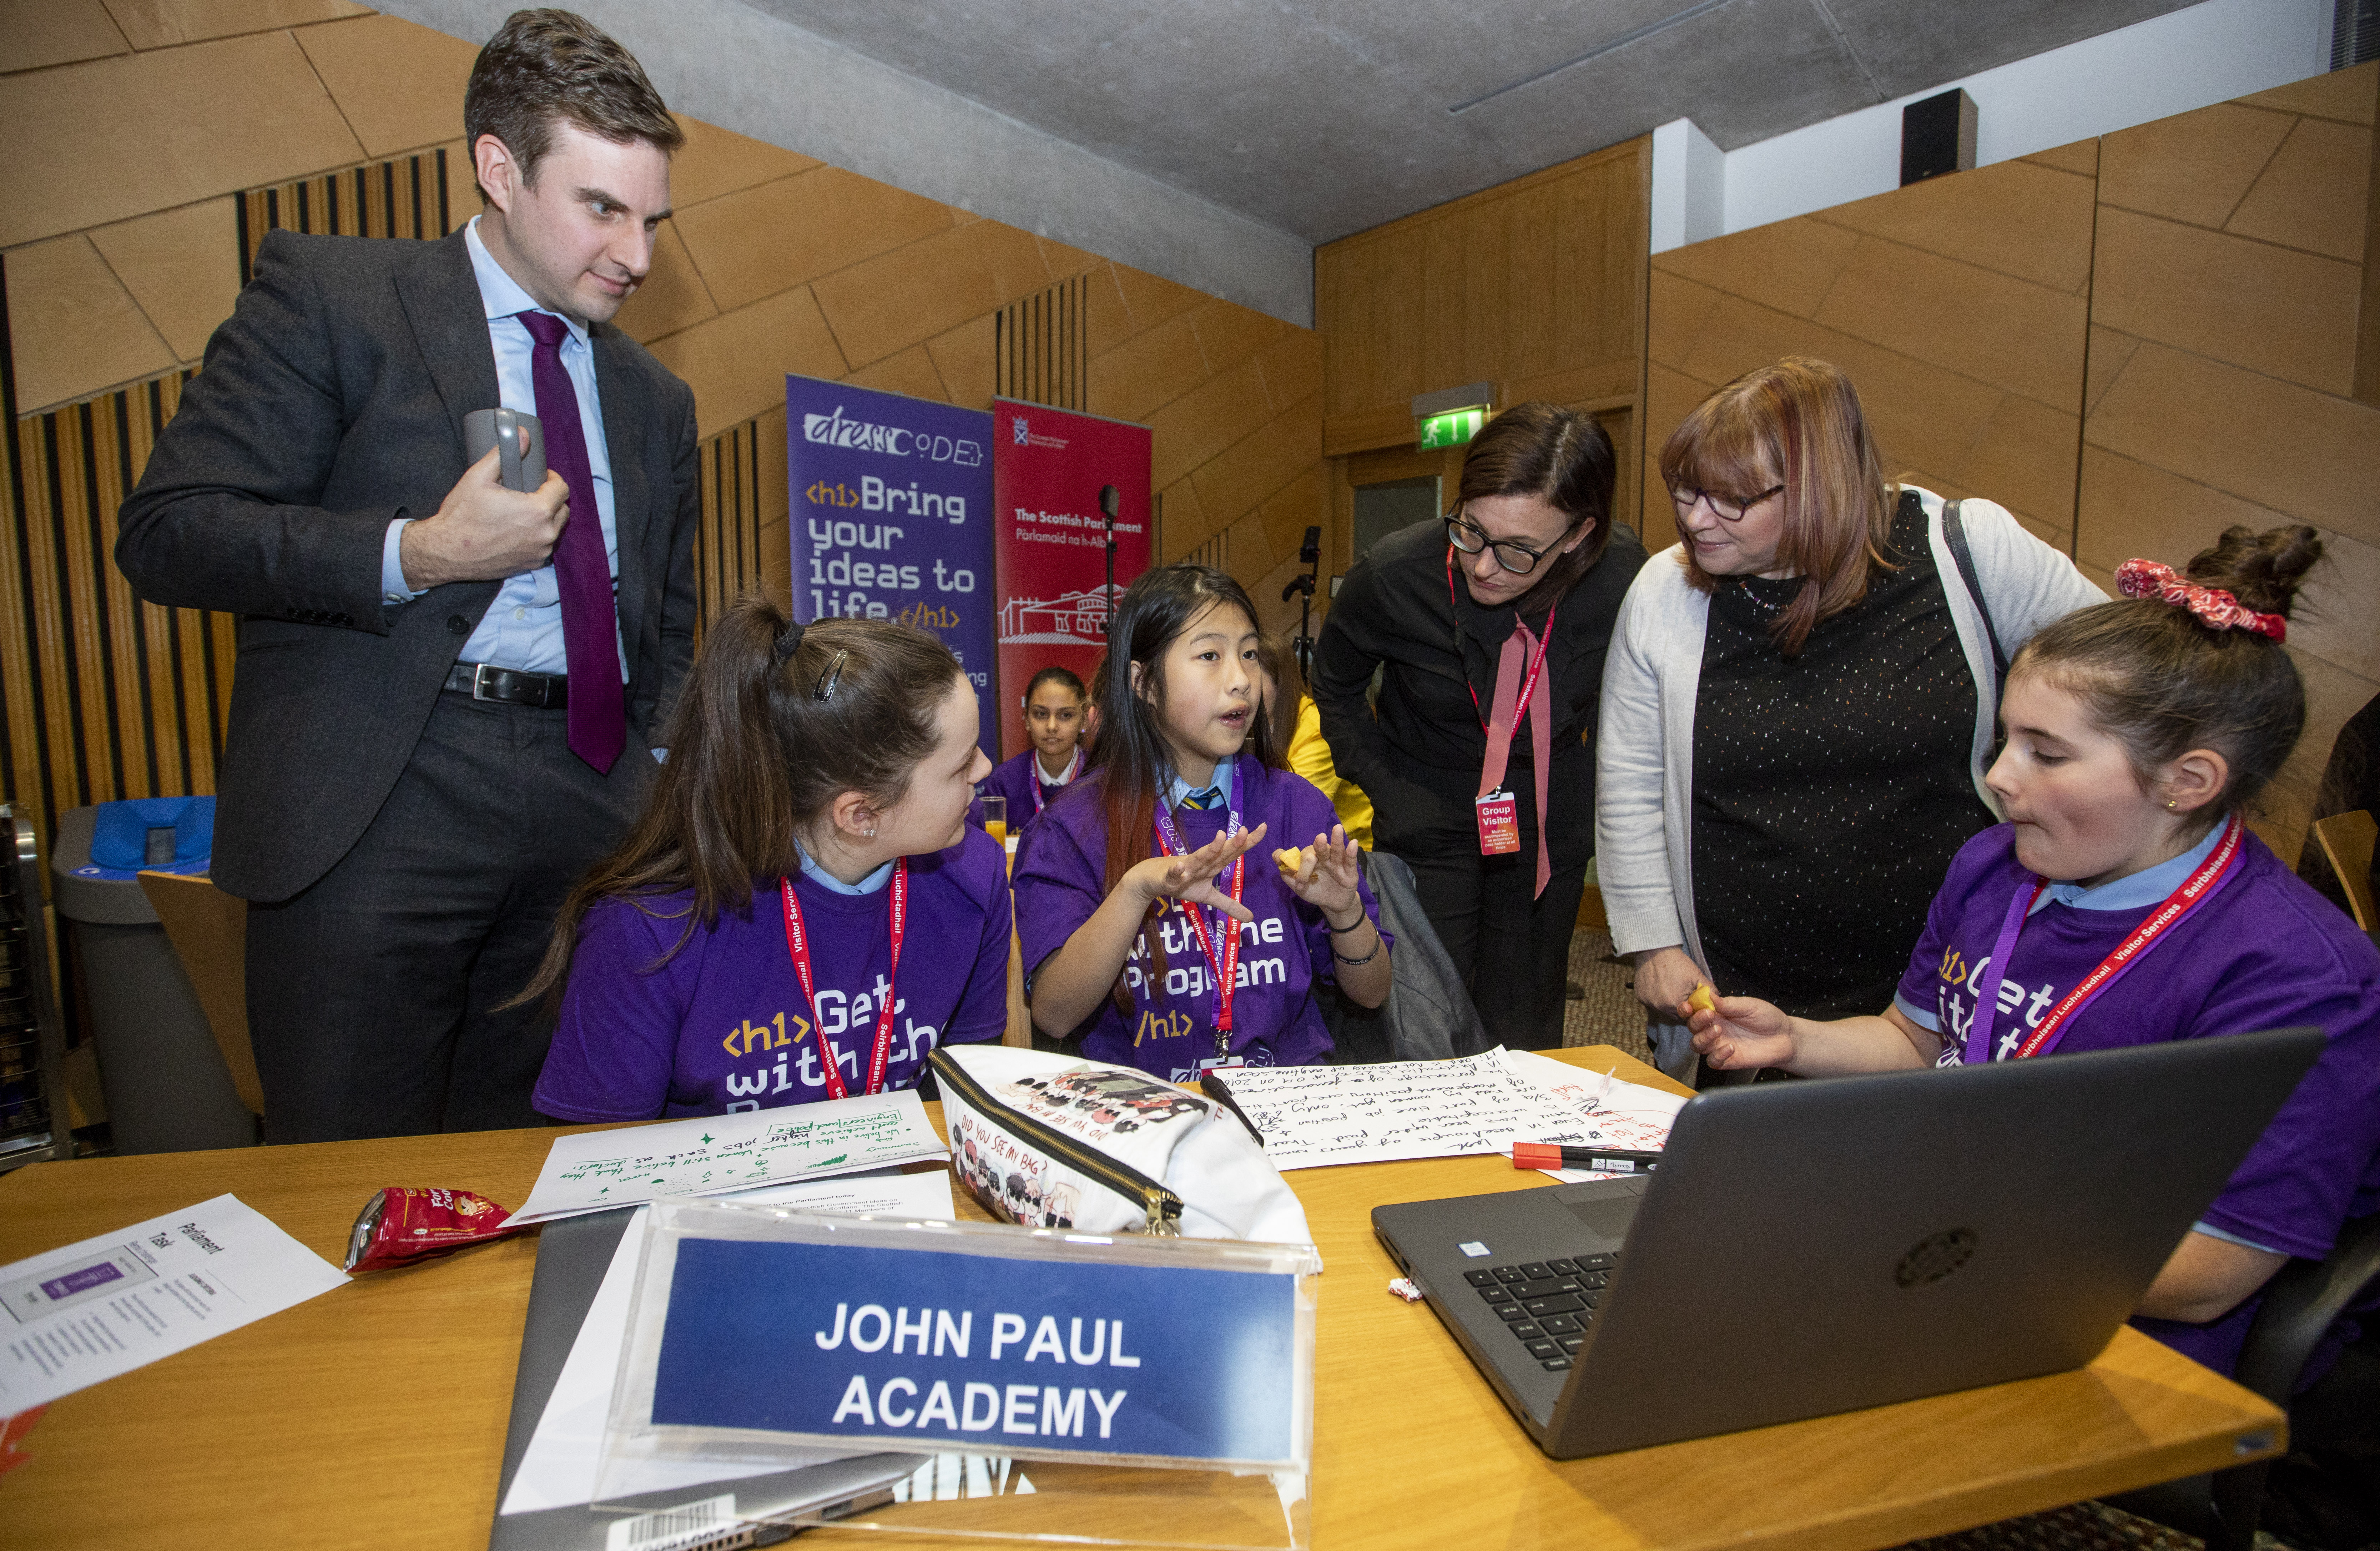 Image shows two Committee Members chatting with three secondary school pupils participating in Hackathon event, to mark the launch of the Committee's report into Science, Technology, Engineering and Maths learning.